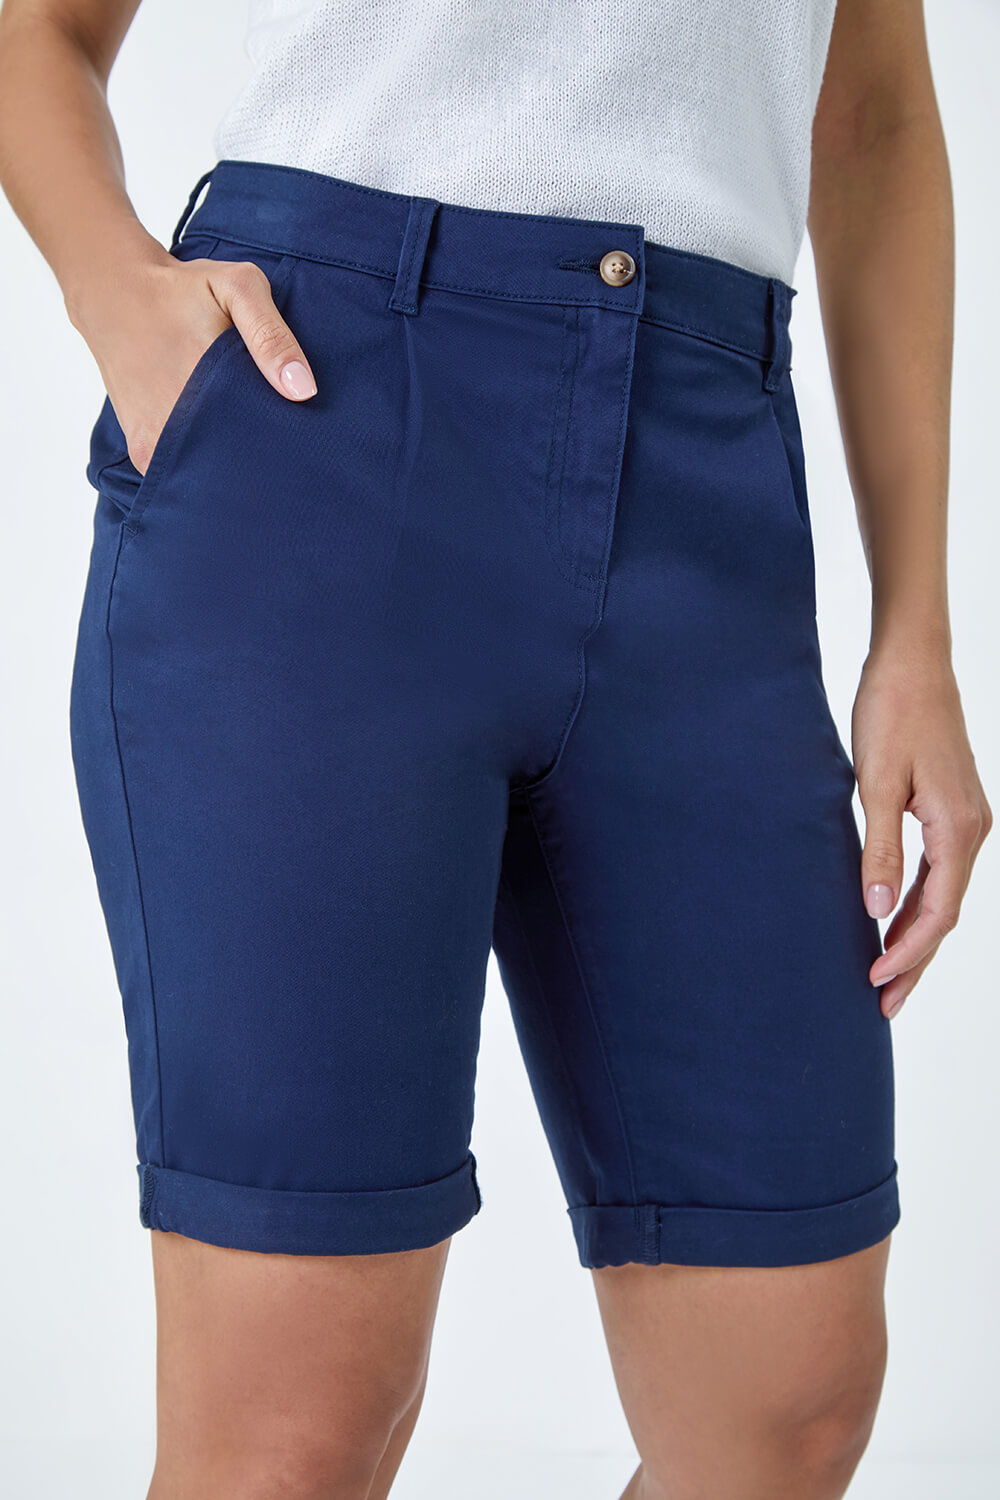 Navy  Cotton Blend Chino Shorts, Image 5 of 5